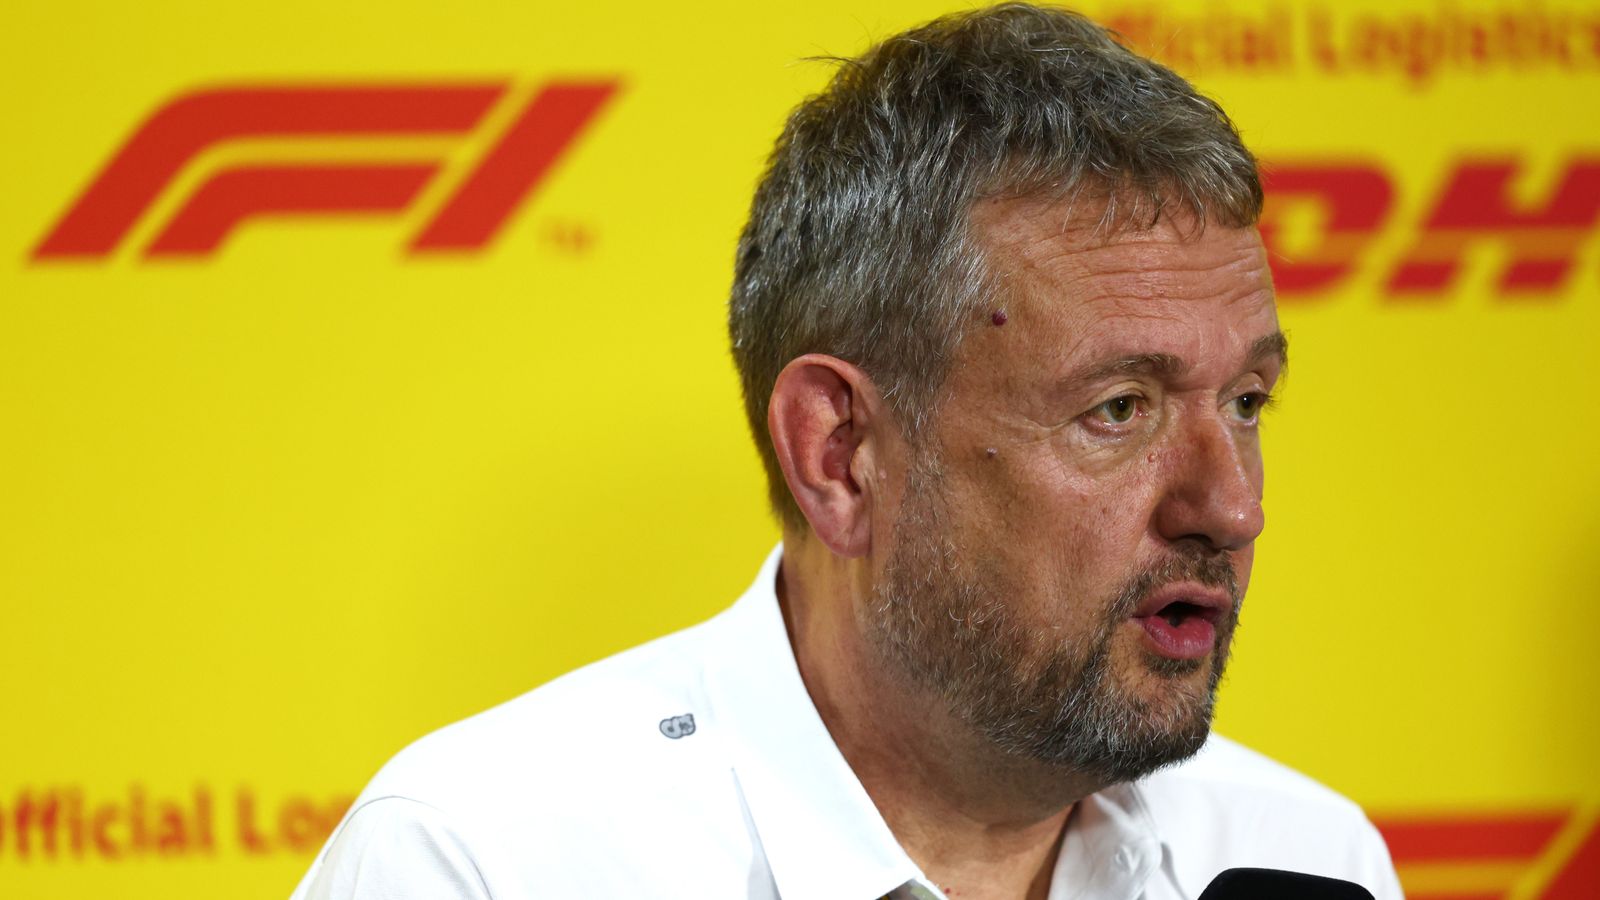 Formula 1: FIA appoints Steve Nielsen as sporting director to help fix race-management issues